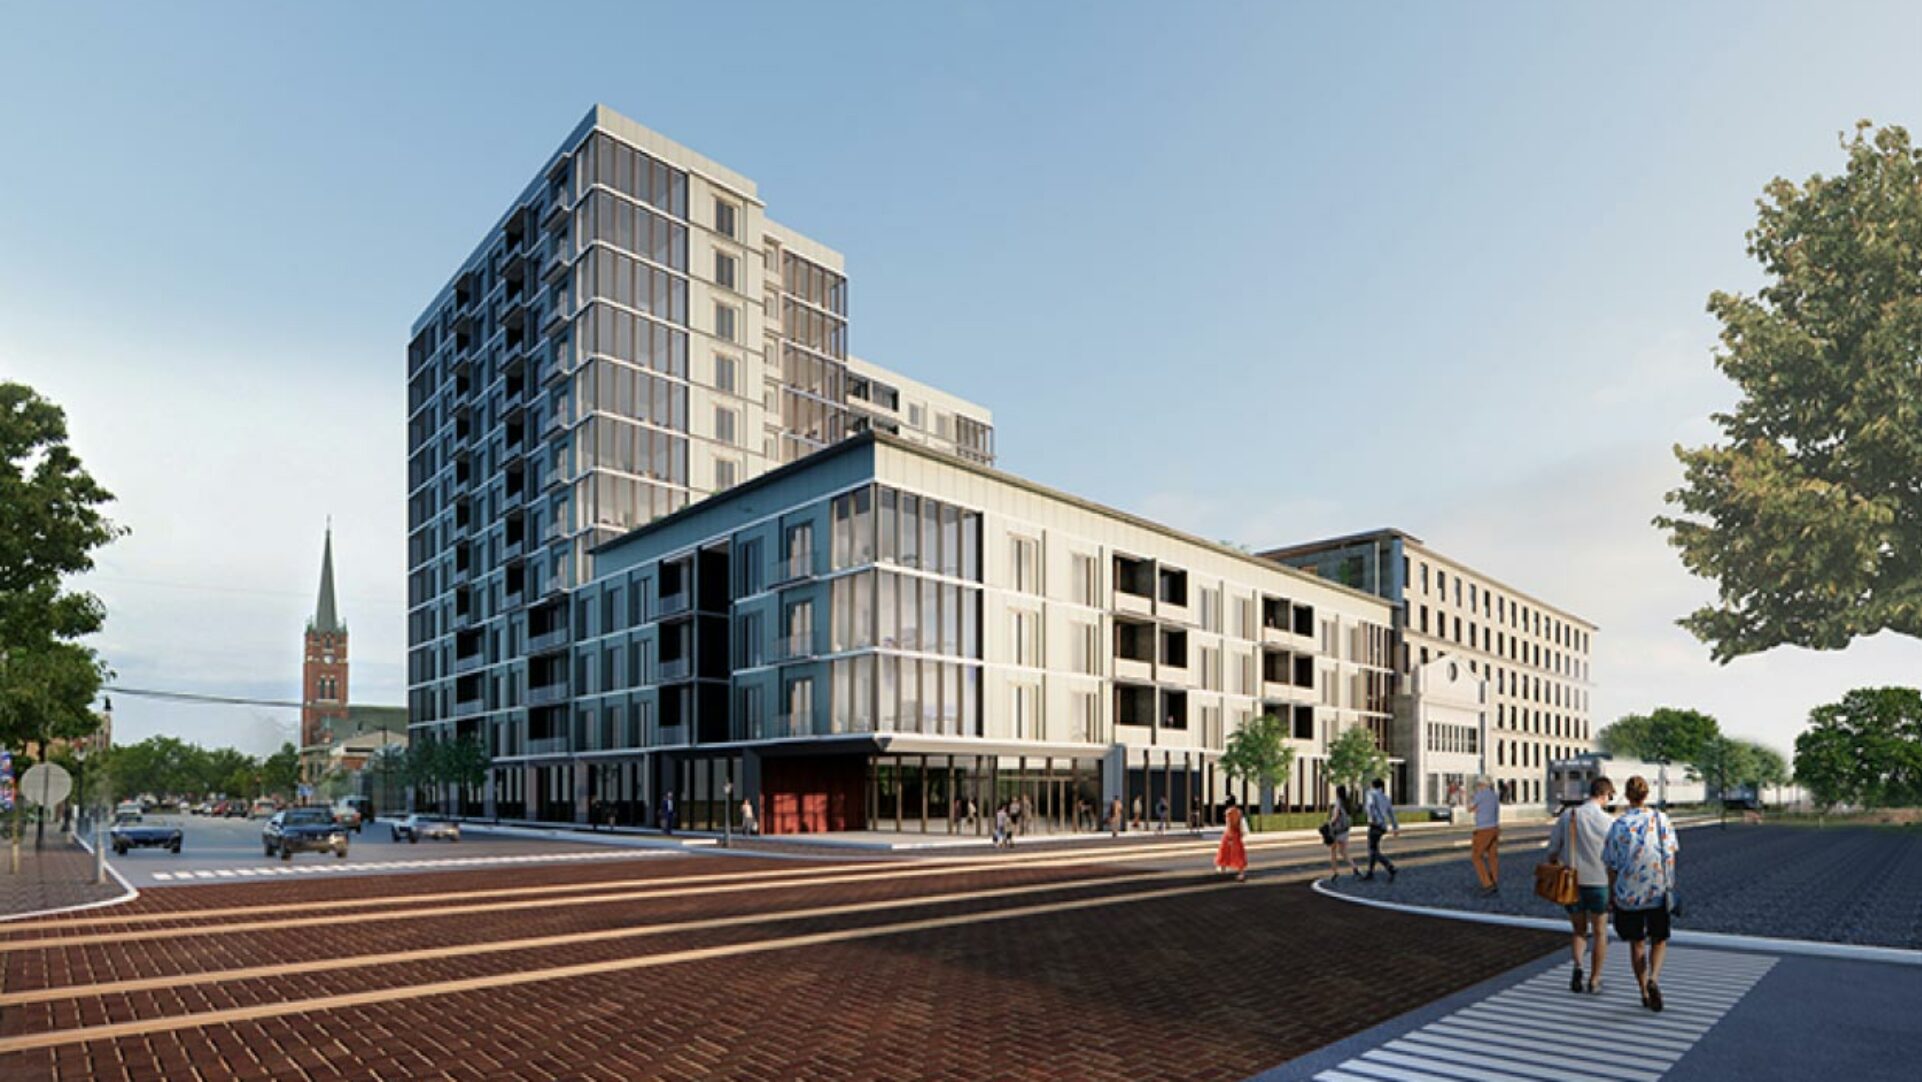 Exterior street view rendering of the concept design for 11th Street Central